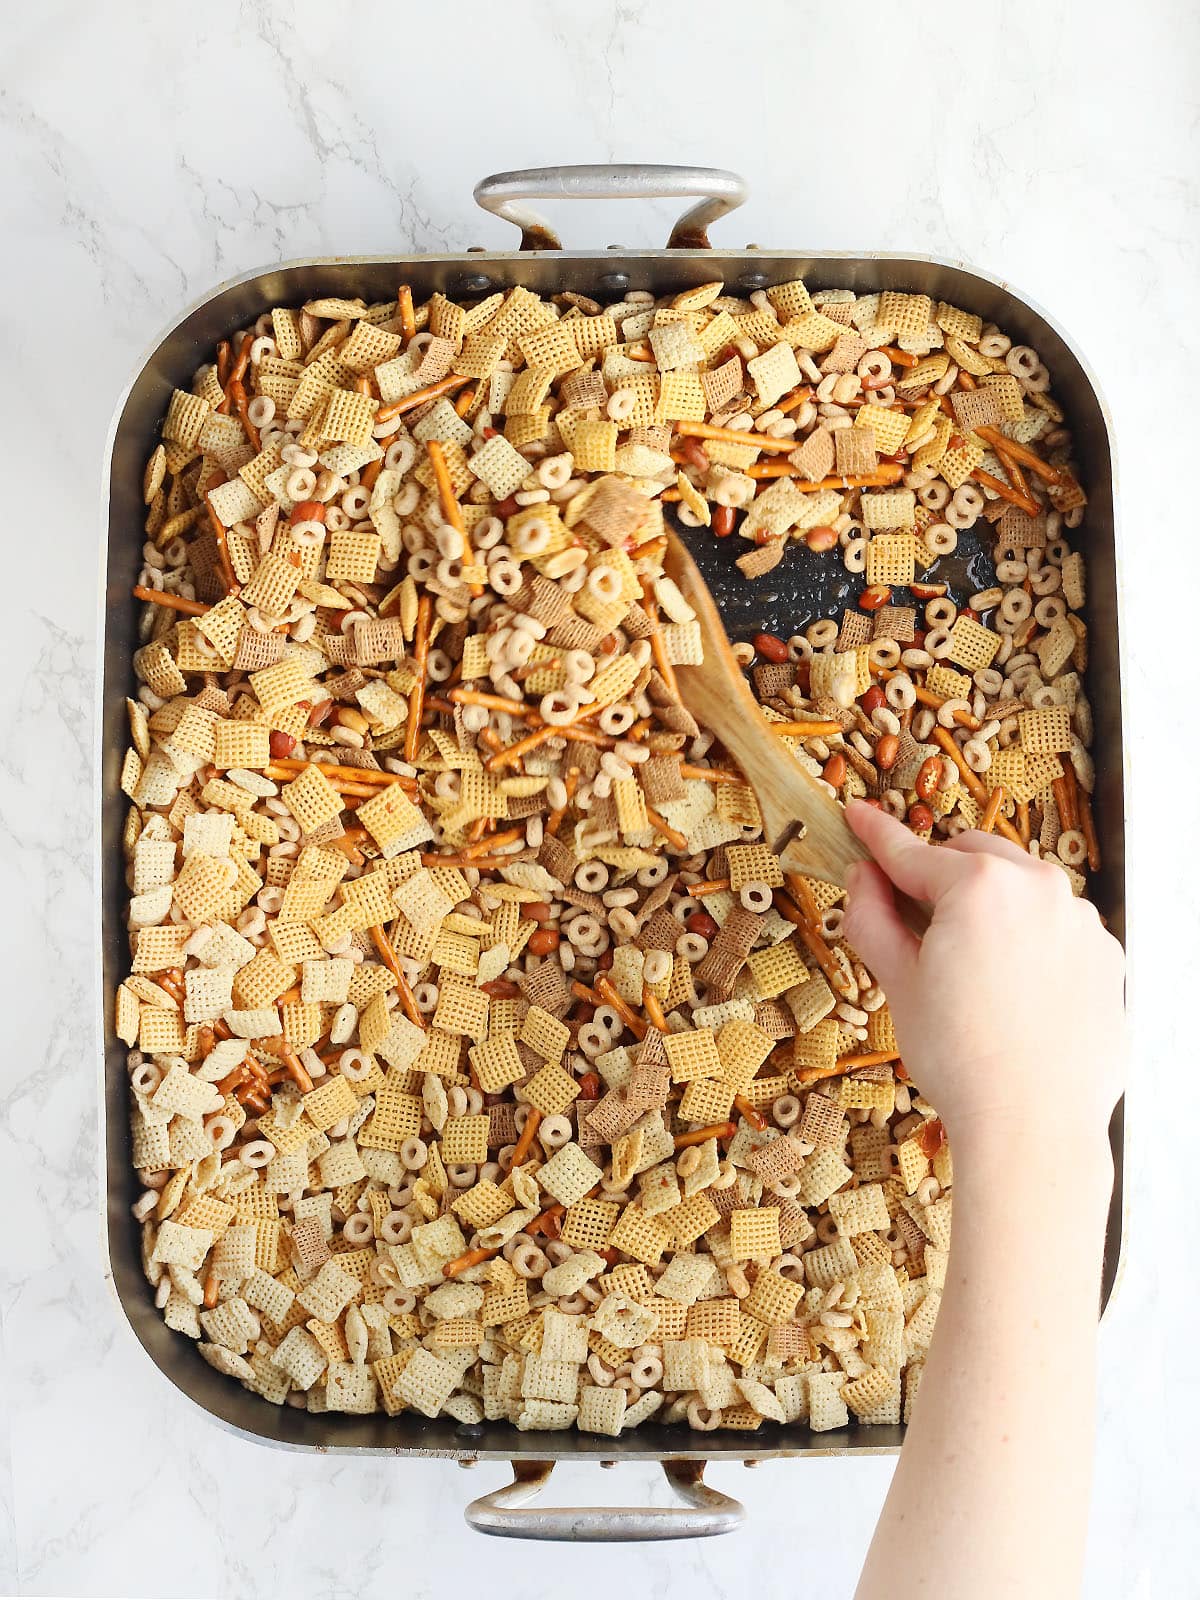 Hand using a wooden spoon to stir Chex mix in a large roasting pan.